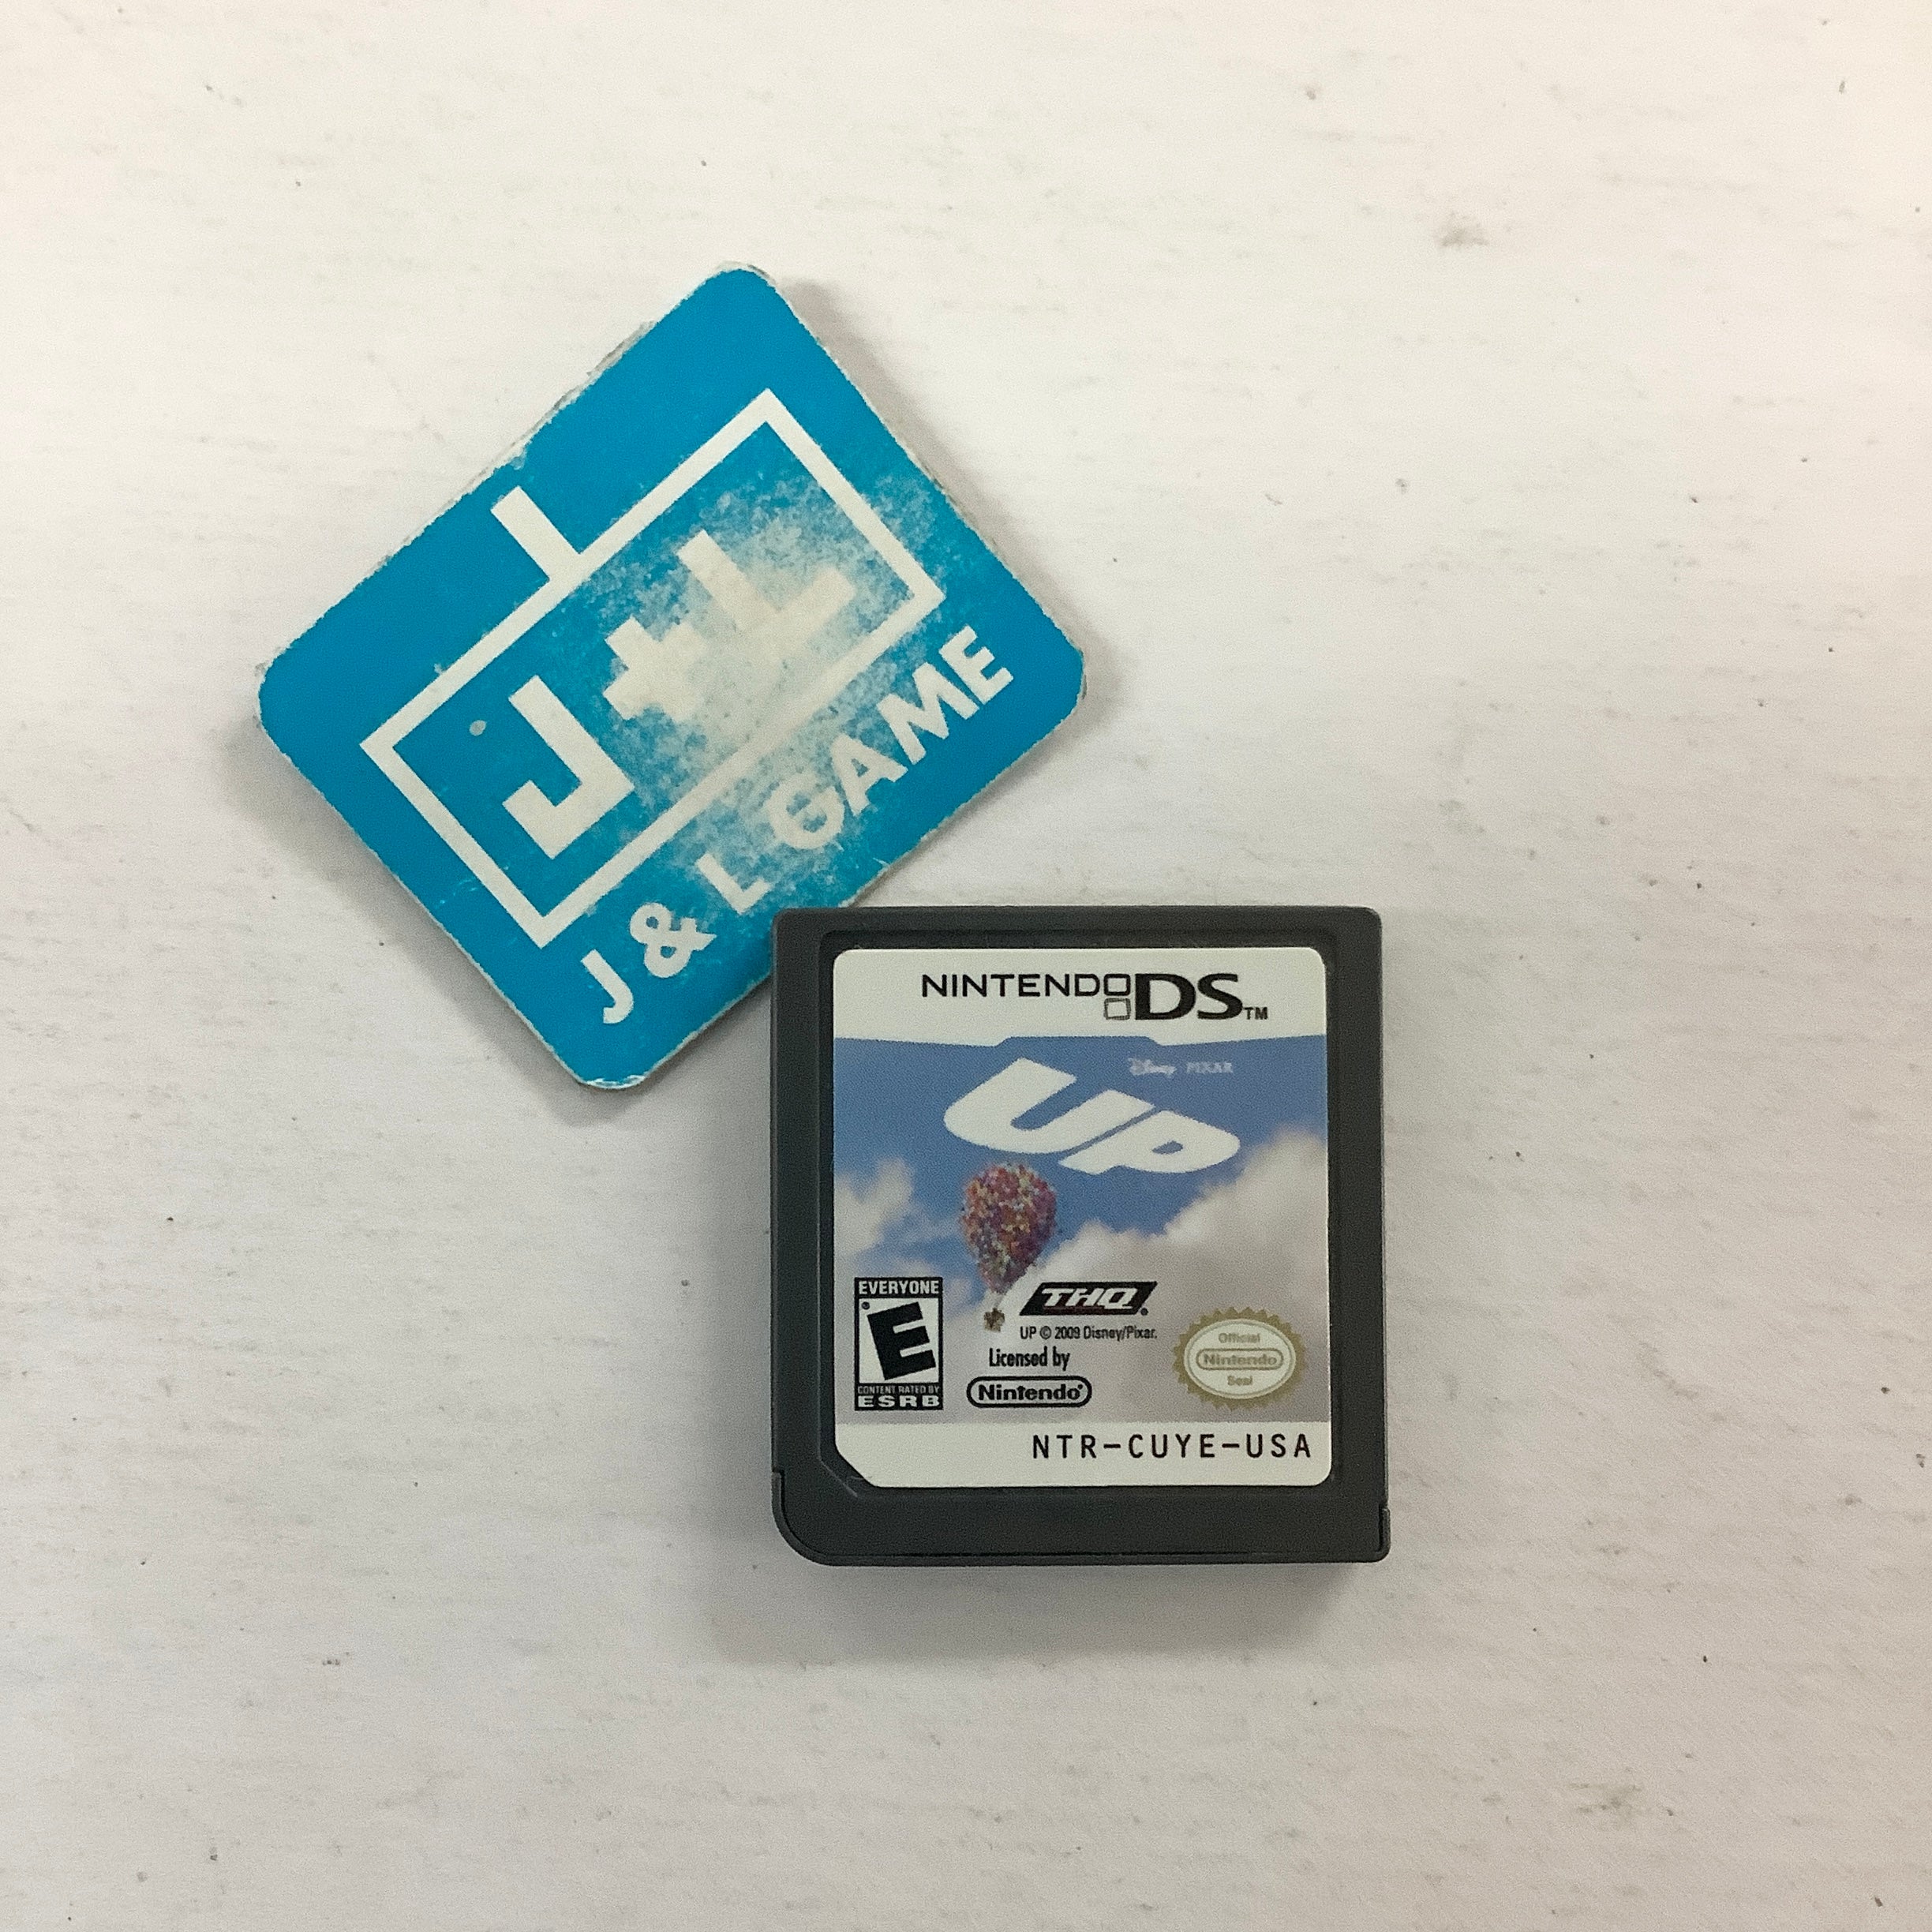 Disney Pixar Up - (NDS) Nintendo DS [Pre-Owned] Video Games THQ   